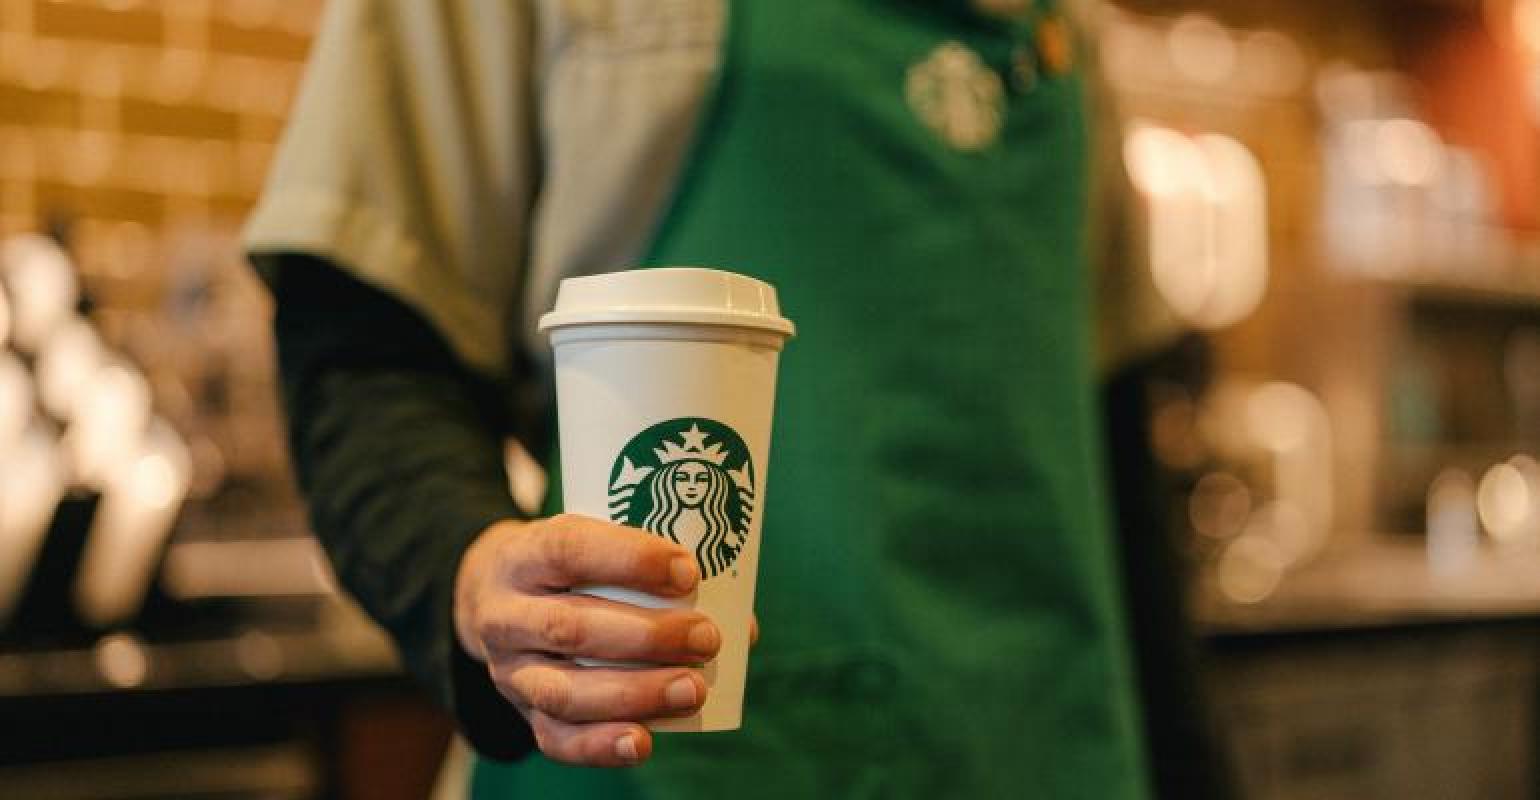 Starbucks surprises customers with personalized cups